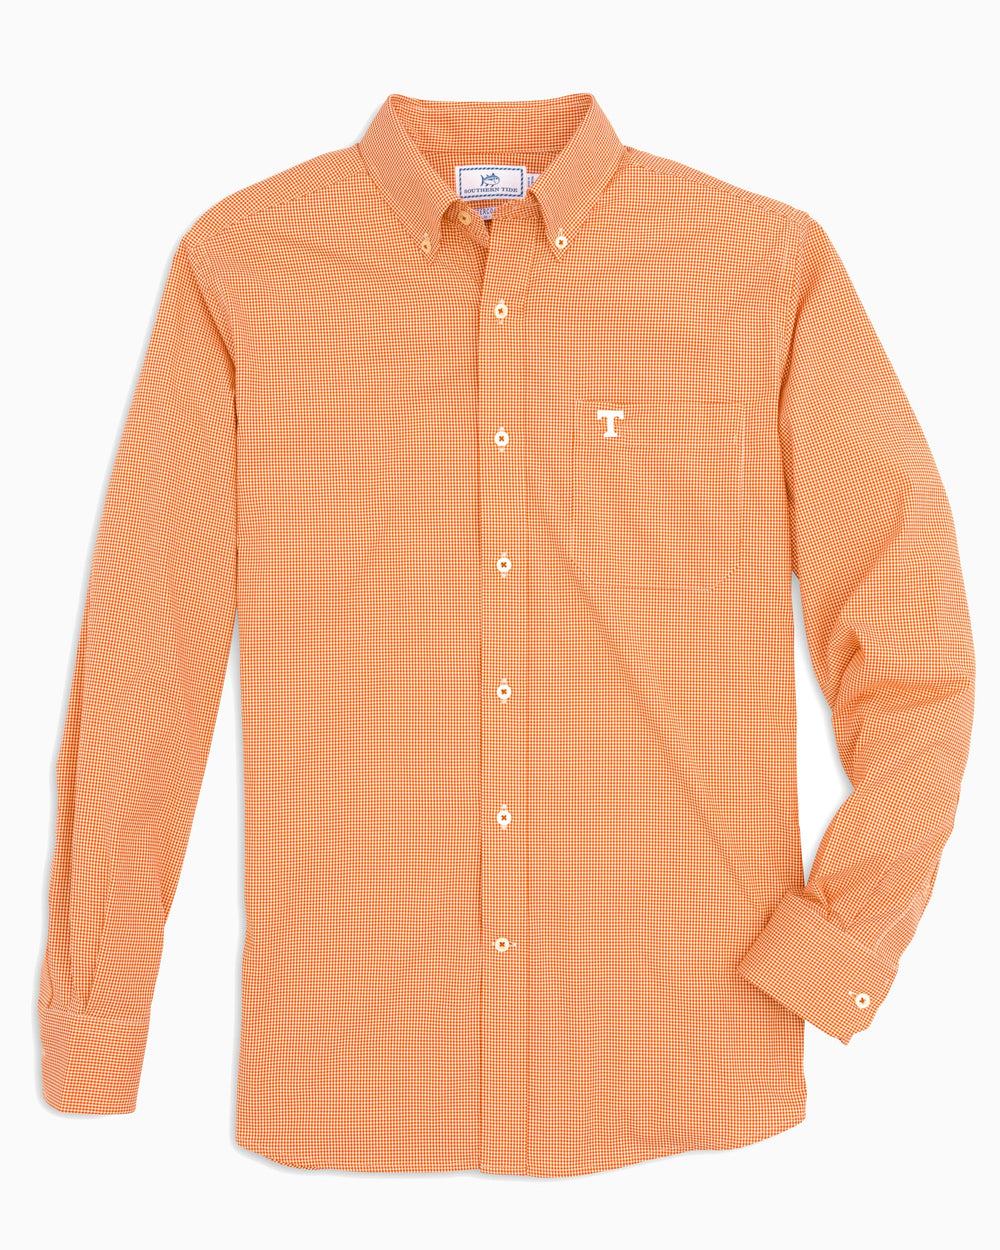 The front of the Tennessee Vols Gingham Button Down Shirt by Southern Tide - Rocky Top Orange